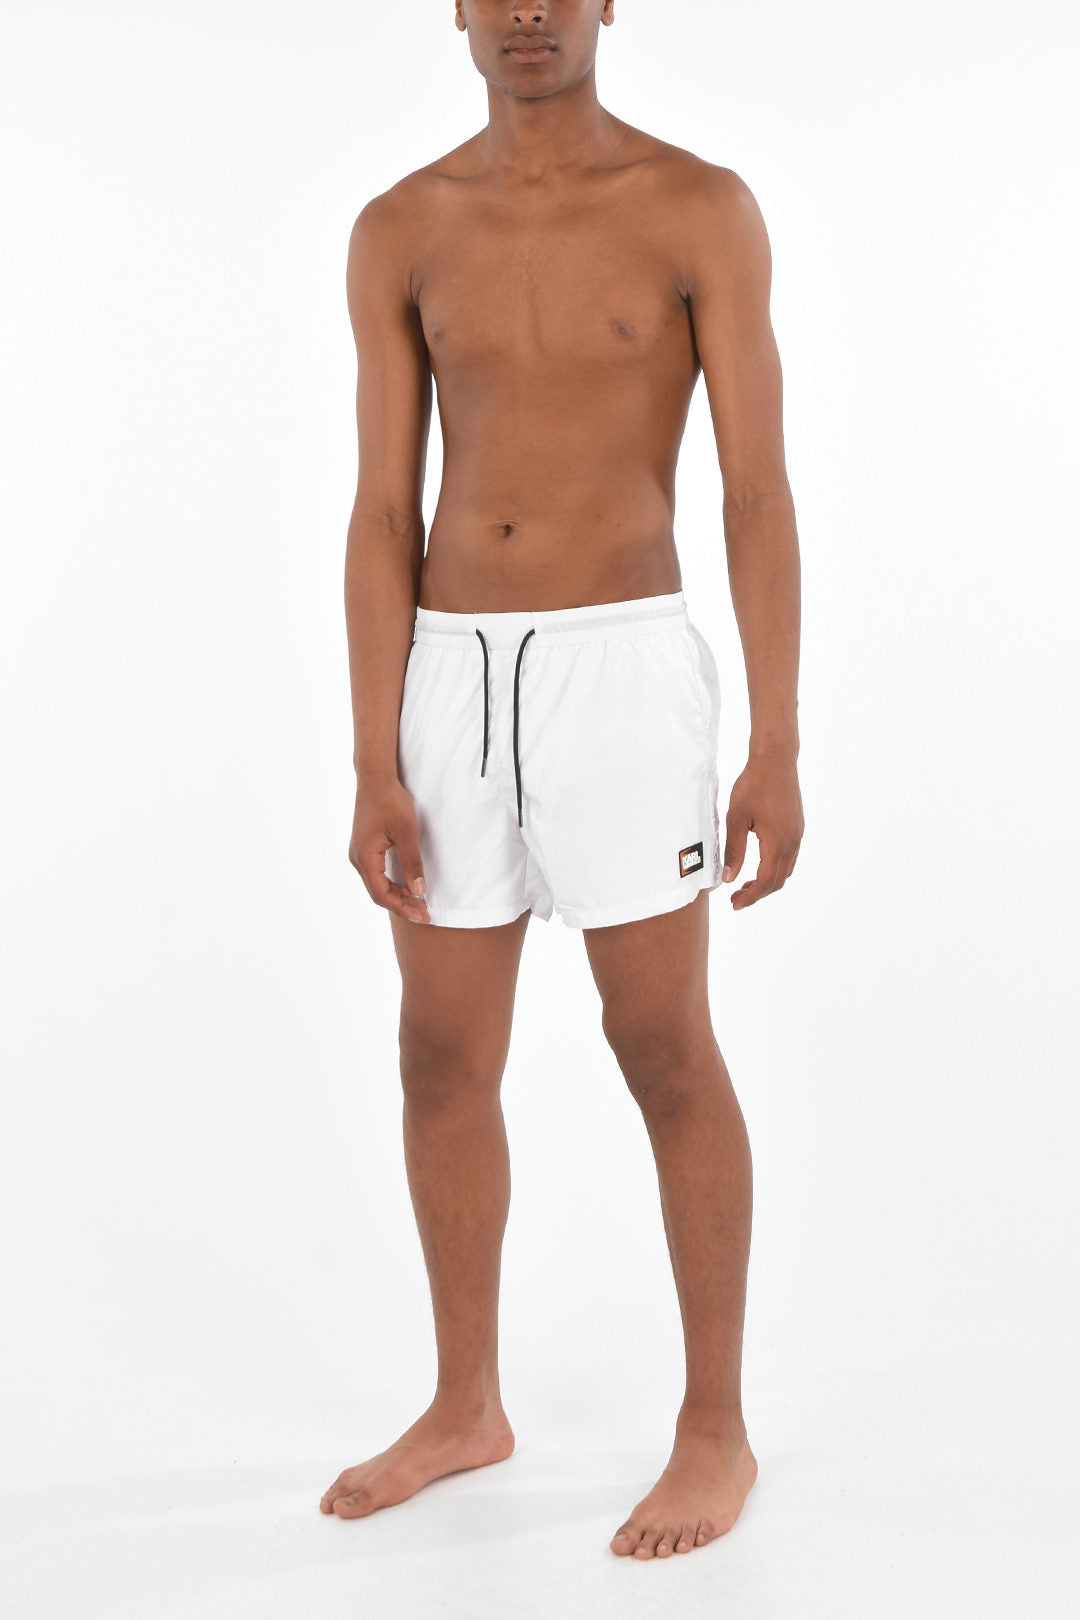 Solid-colored ethnic boxer swimsuit with white elastic waistband